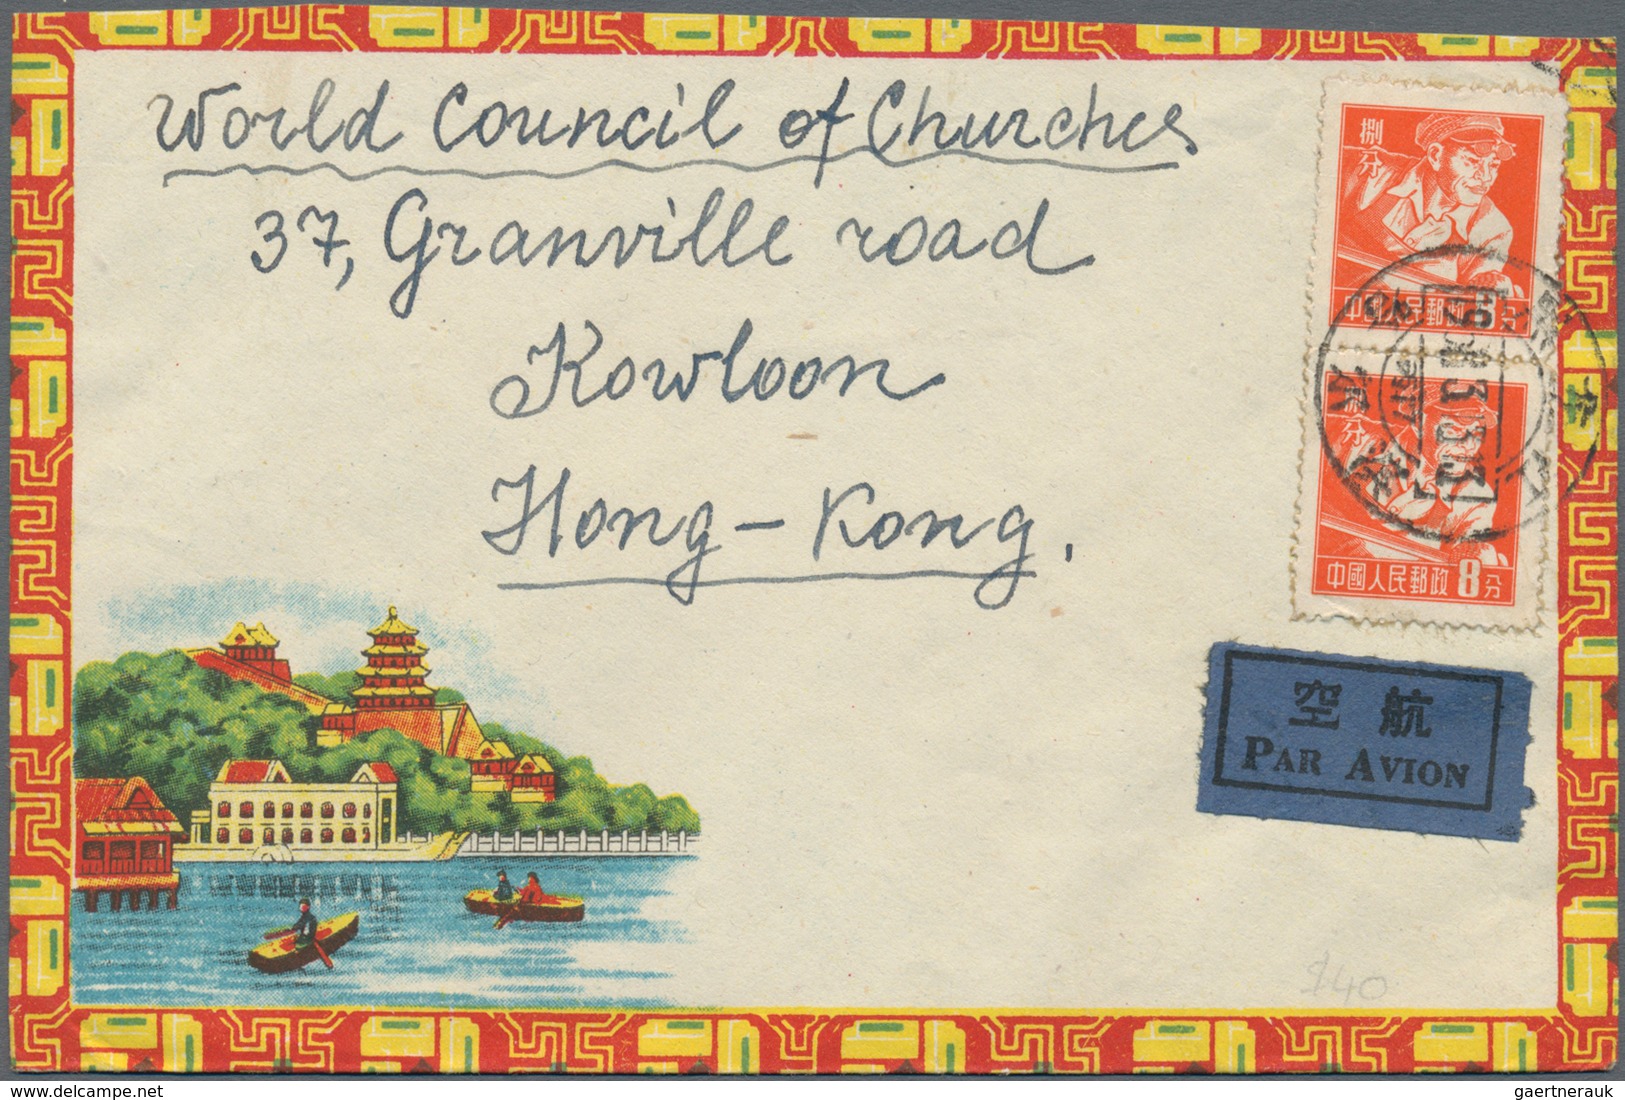 China - Volksrepublik: 1953/1960, illustrated covers used to Hong Kong (18, mostly surface) or to Ru